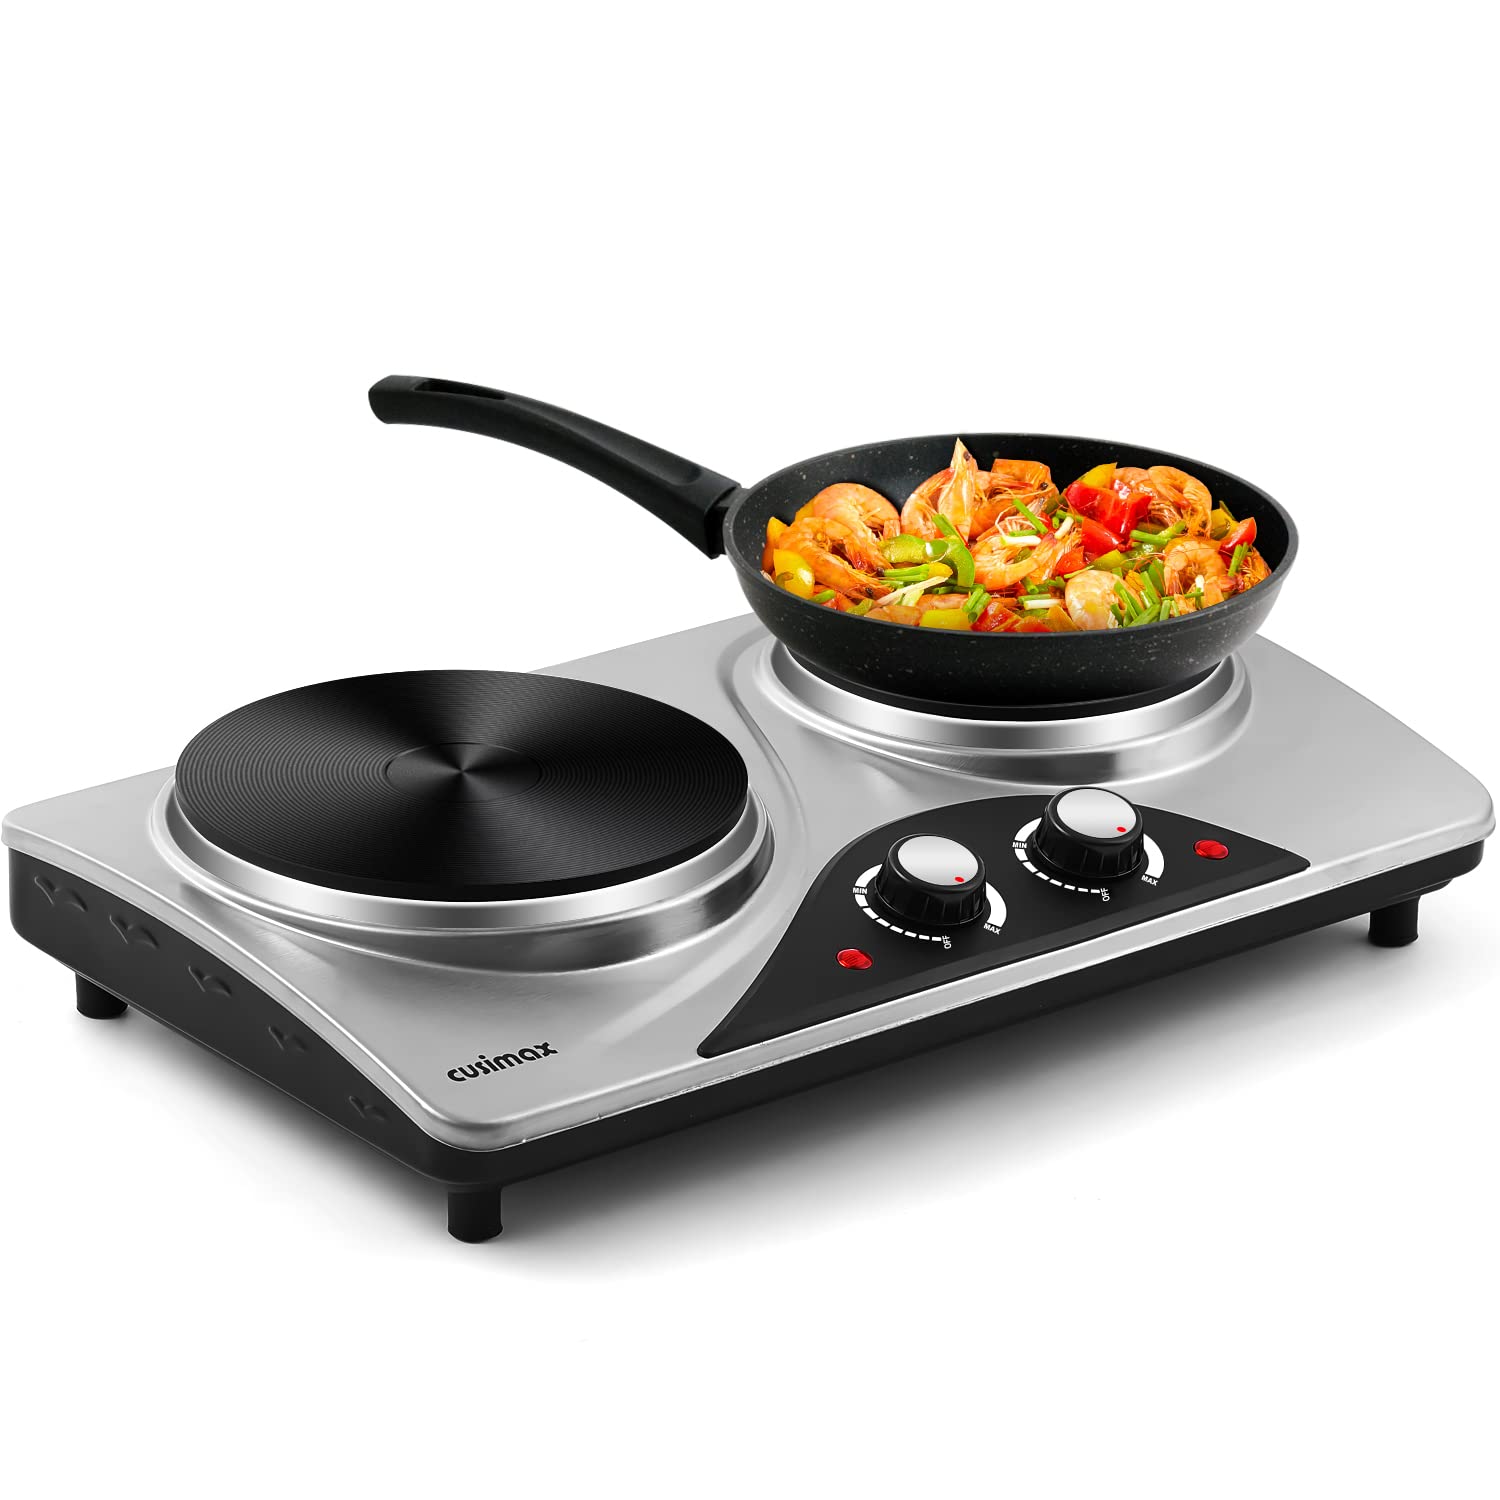 Cusimax 1800W Portable Electric Countertop Double Burner,Stainless Ste